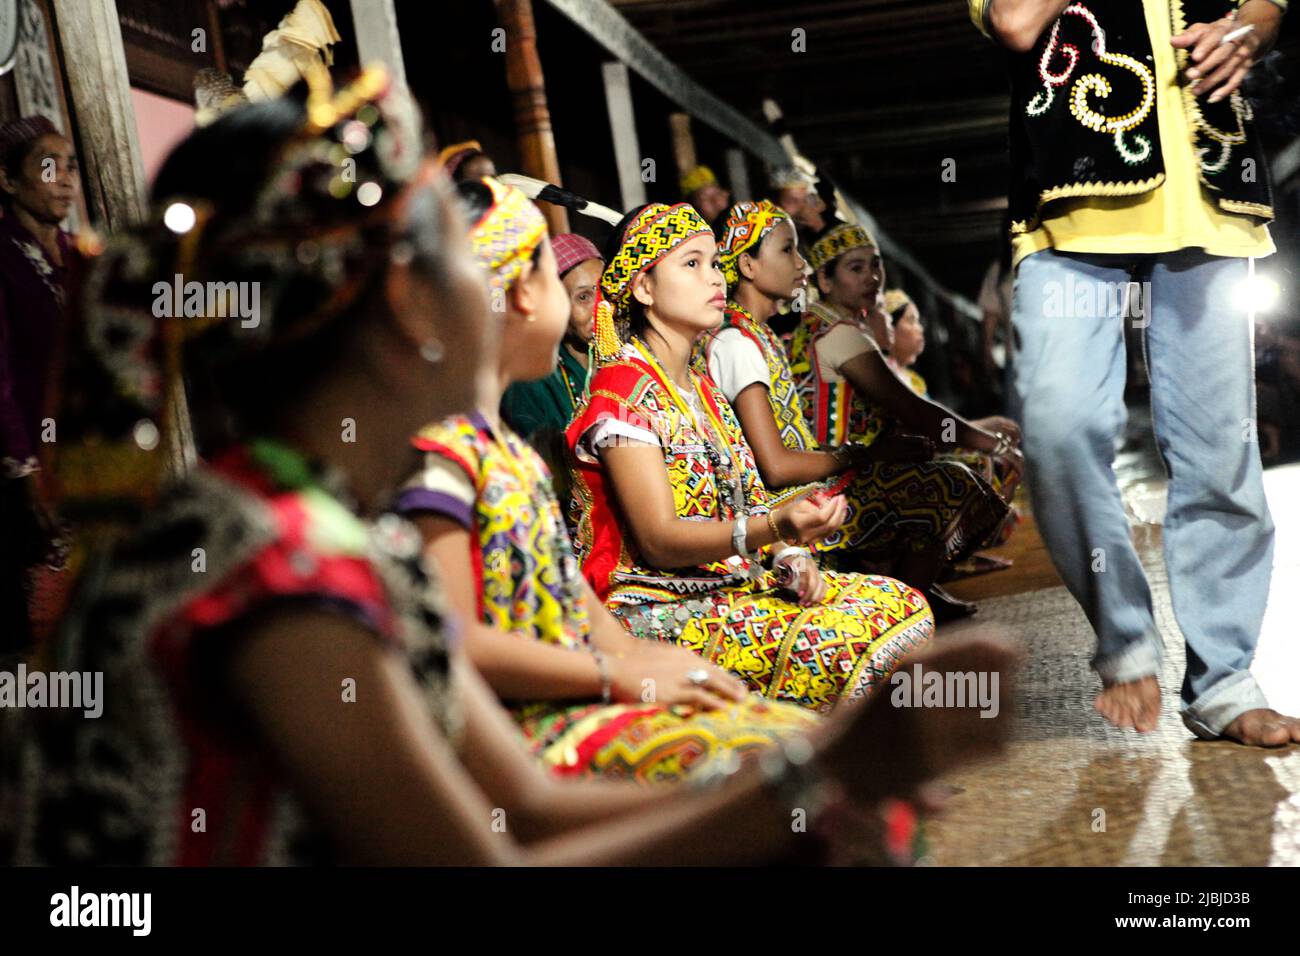 Young women in traditional attire sitting for a welcome ceremony during an ecotourism event at Bali Gundi longhouse of traditional Dayak Taman community in Sibau Hulu, Putussibau Utara, Kapuas Hulu, West Kalimantan, Indonesia. Stock Photo